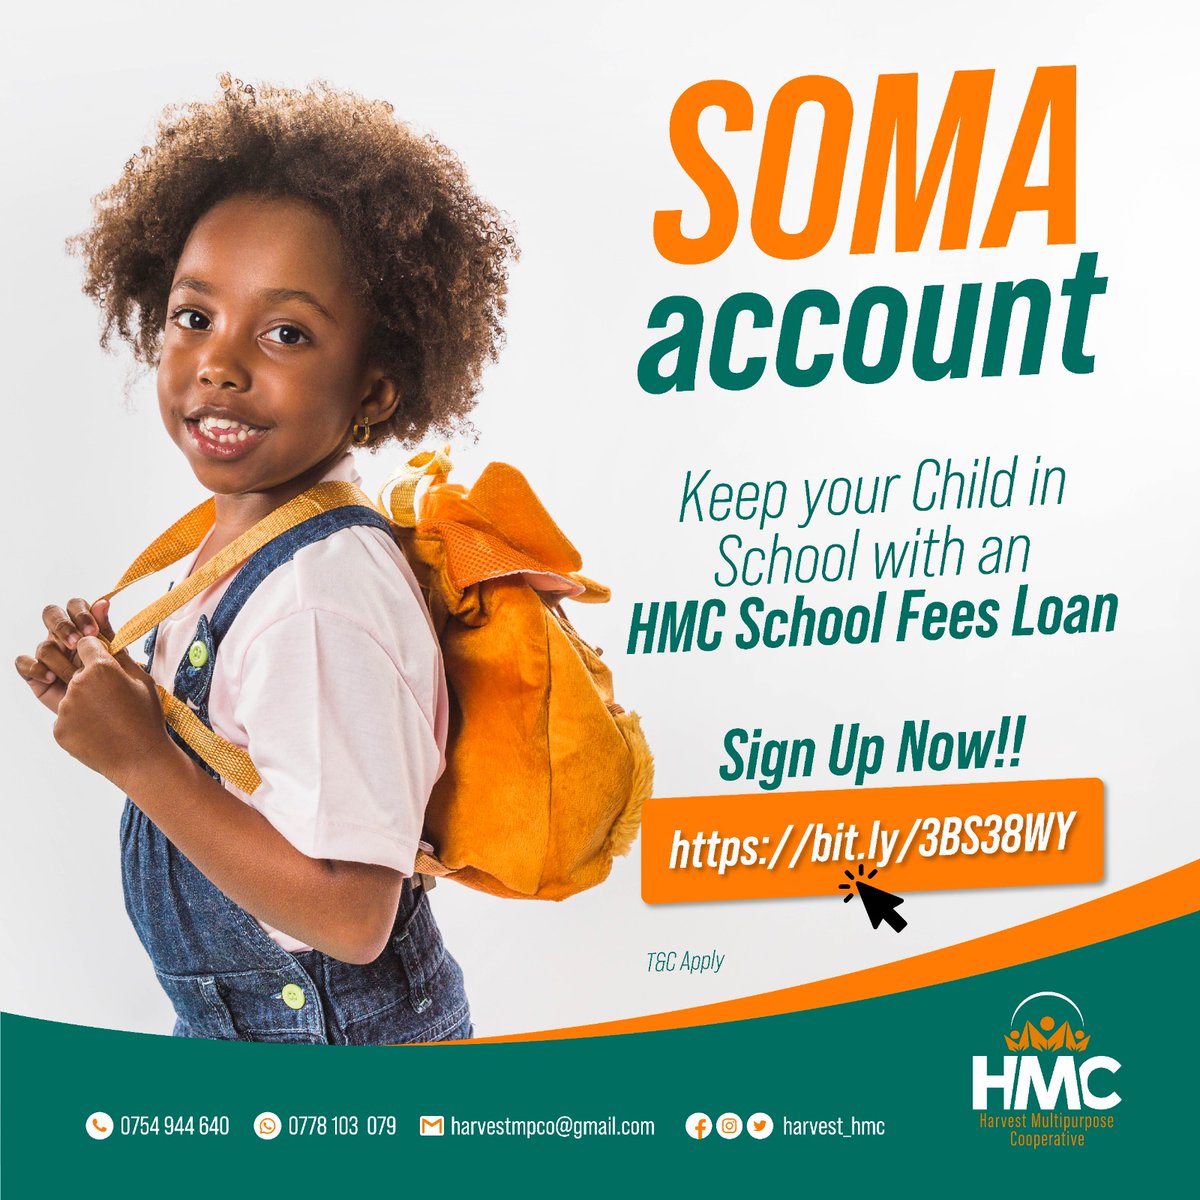 If you need a little helping hand with clearing your children's school fees, #HMC is here to lend a hand.

Register today, for a #SomaAccount and get the help you need. 

#SchoolFeesLoan #InvestmentClub